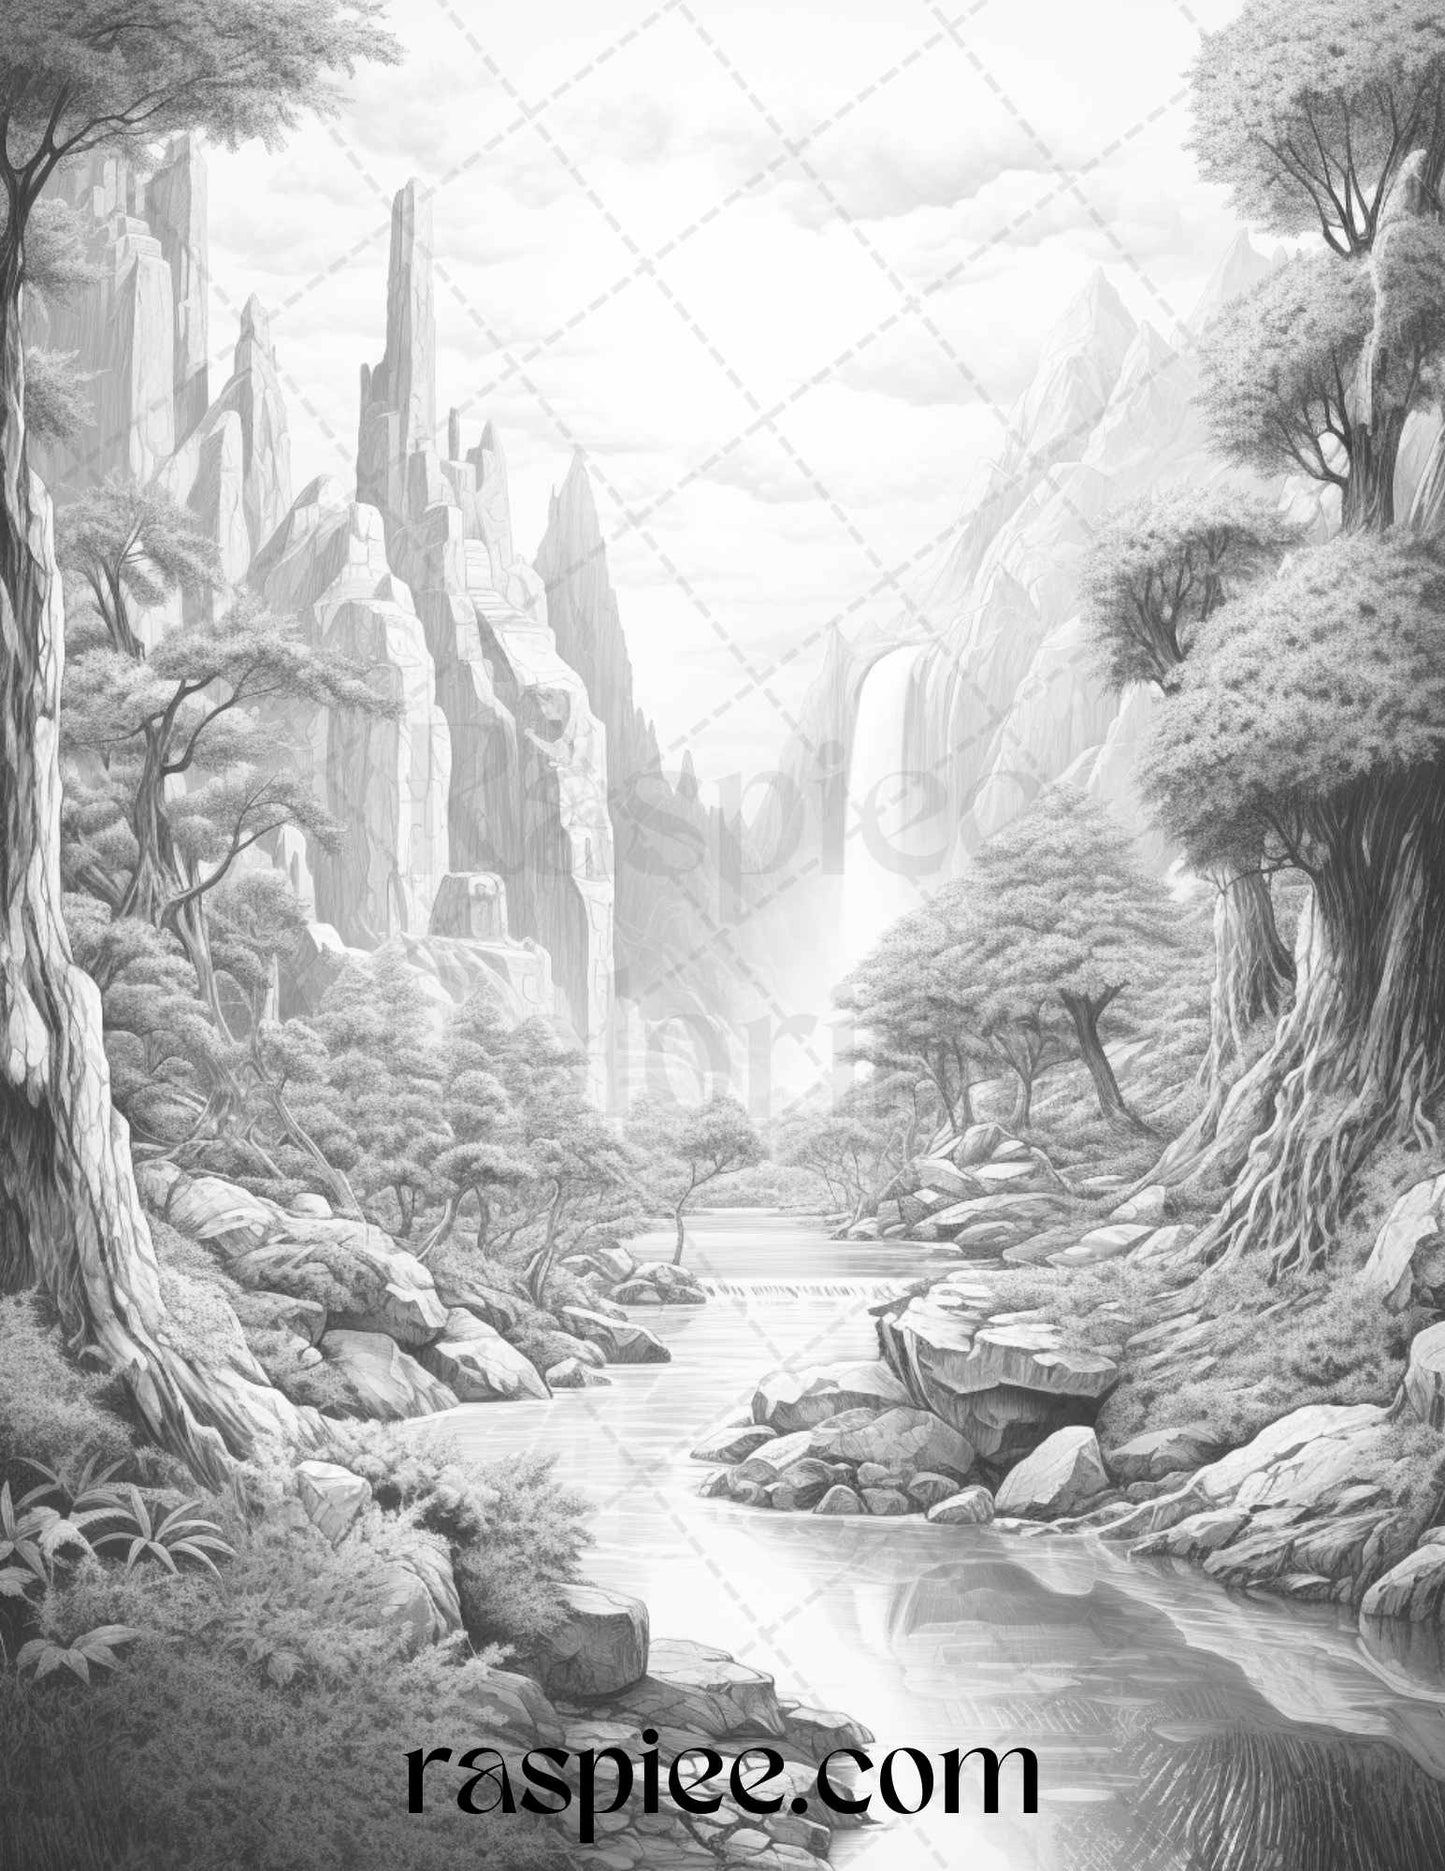 Fantasy Landscapes Coloring Pages for Adults, Relaxing Printable Coloring Sheets, DIY Adult Coloring Pages, Fantasy Landscape Printable Downloads, Mindful Coloring Activities, Detailed Grayscale Printable Art Therapy